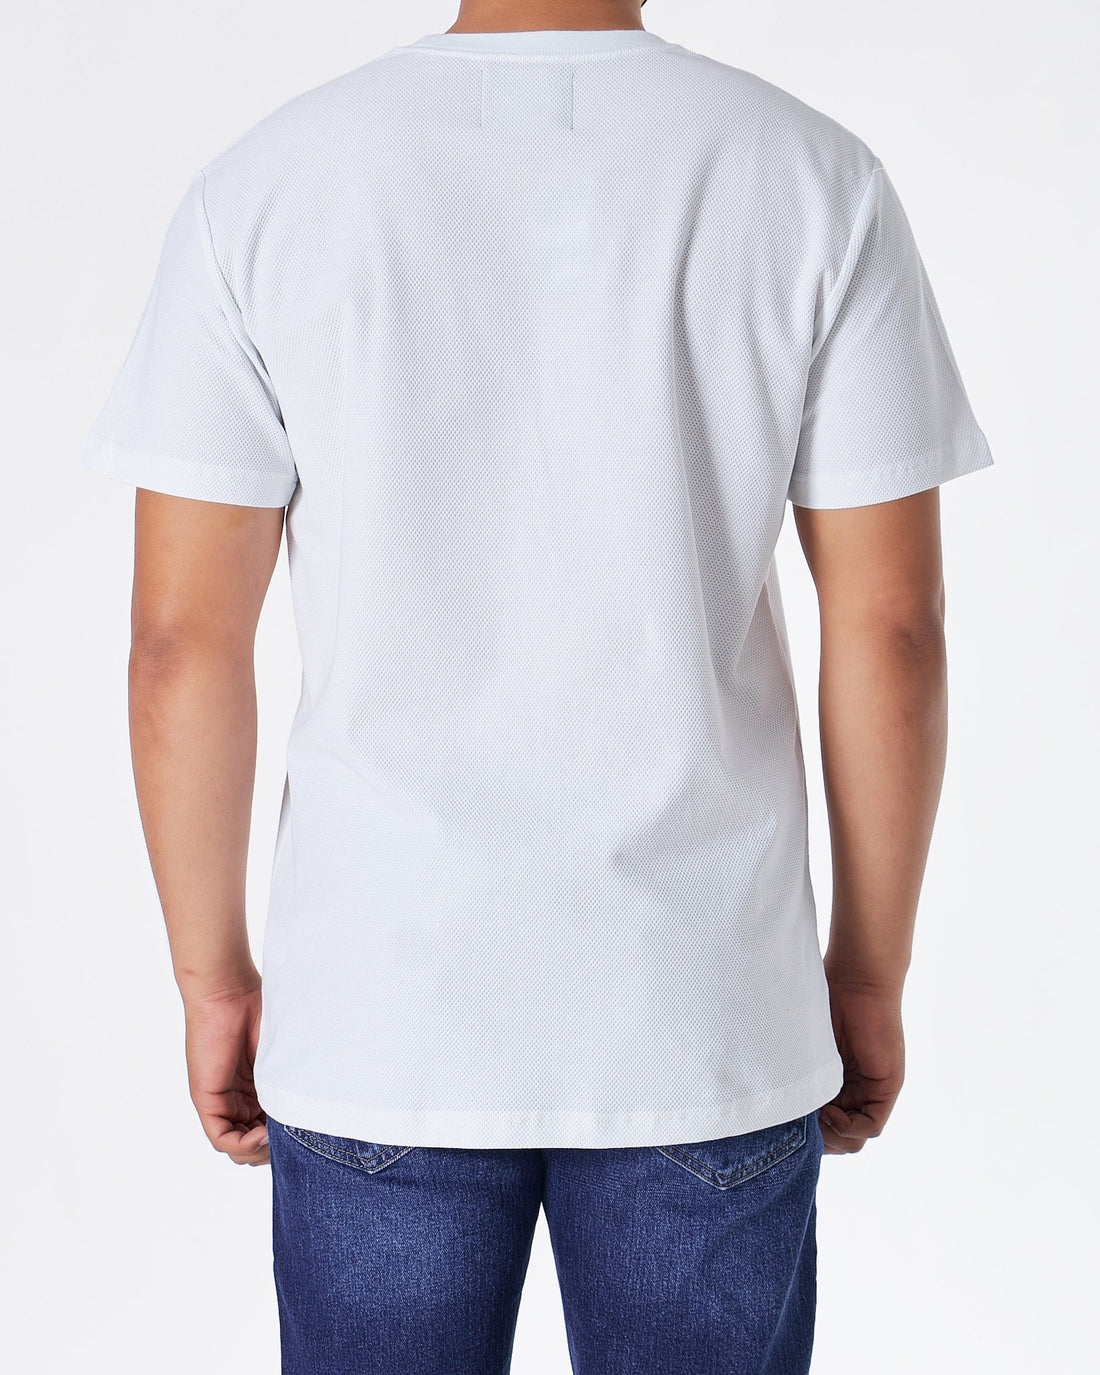 MOI OUTFIT-ABA Solid Color Comfort Men White T-Shirt 14.90